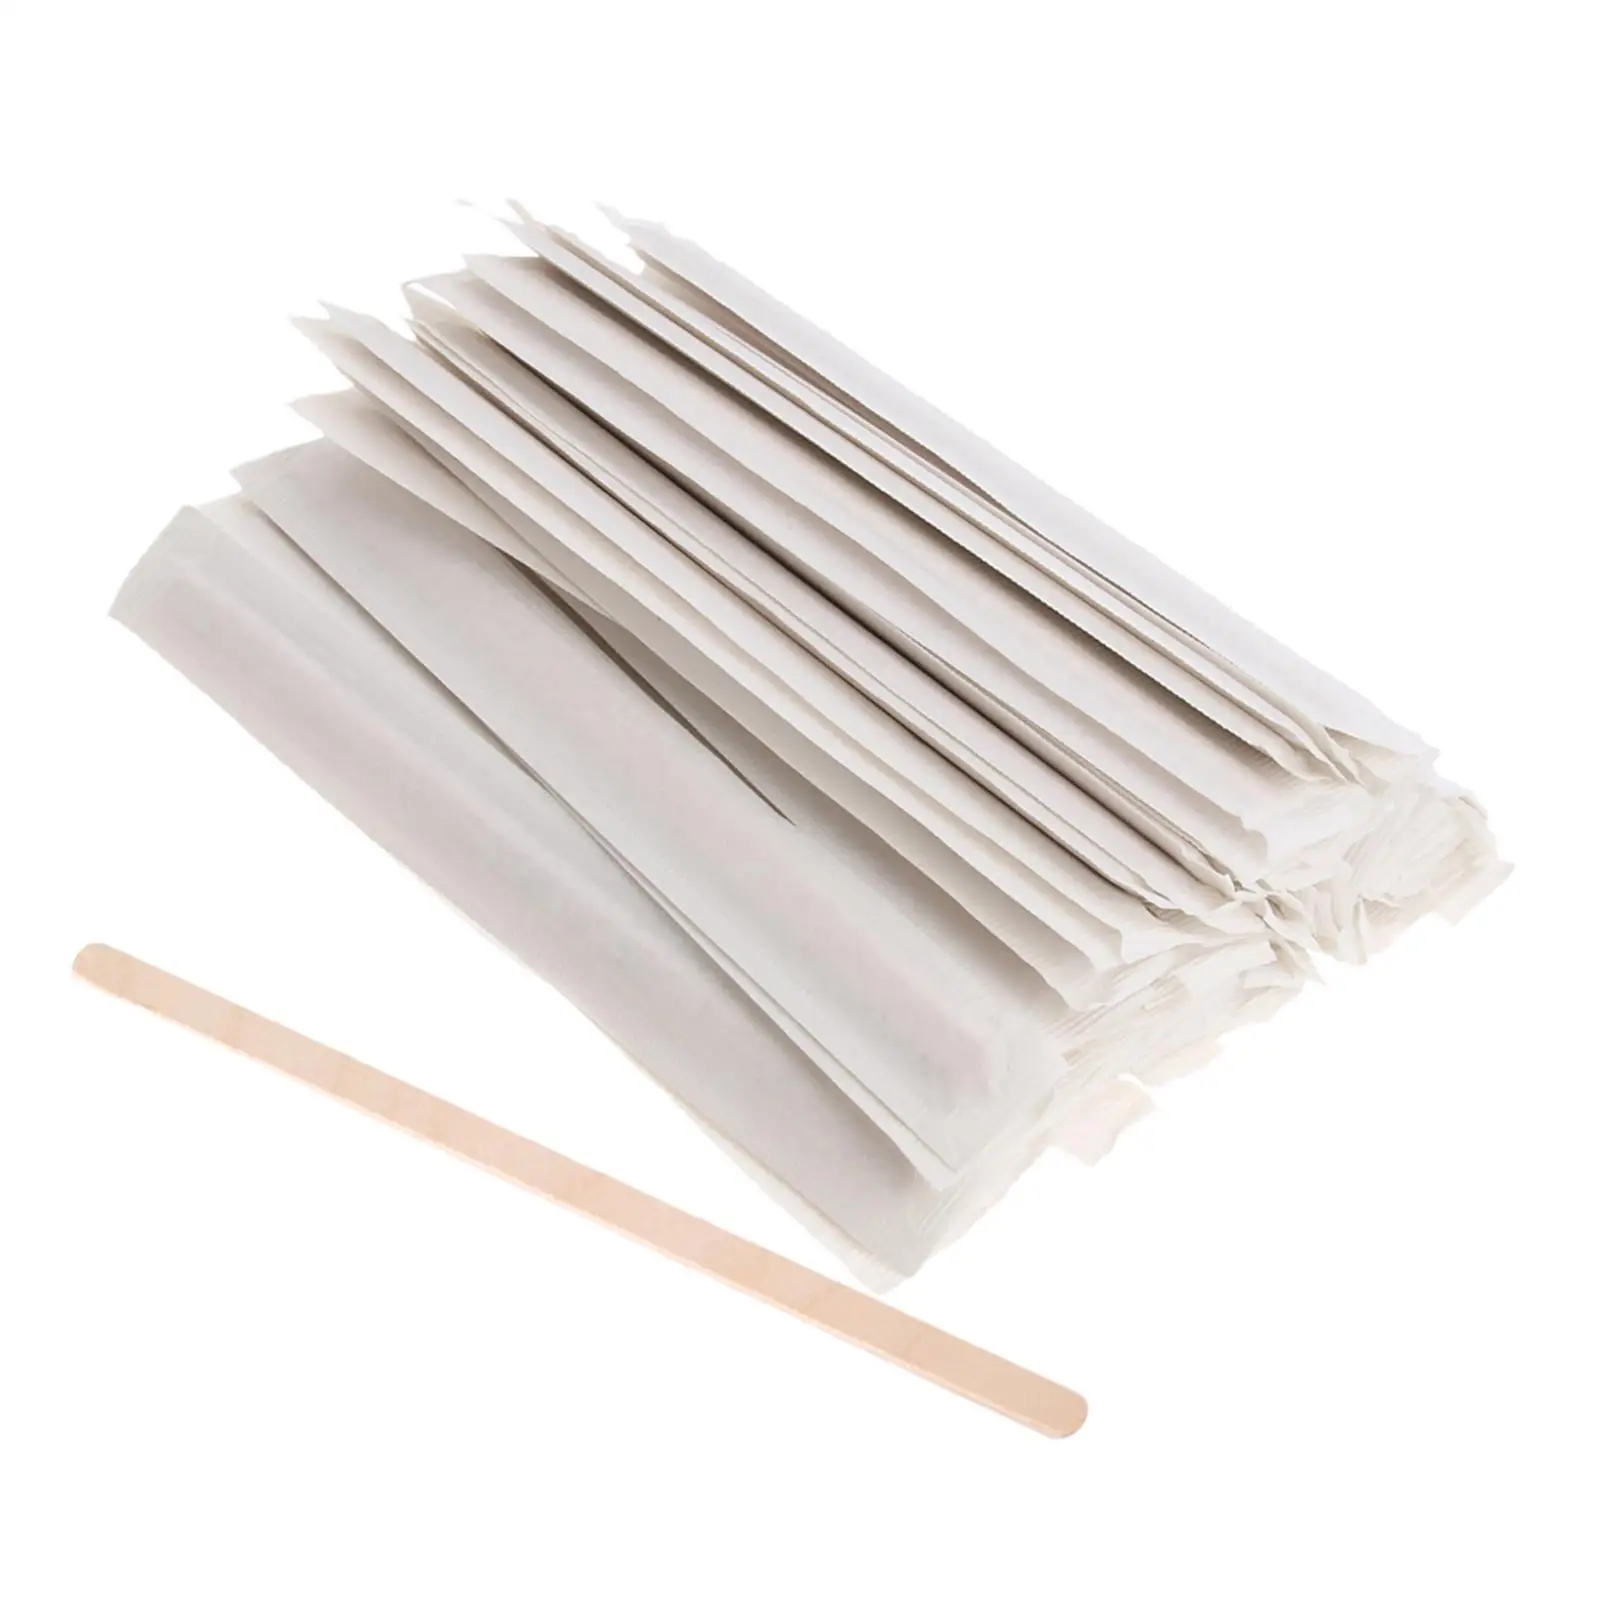 100x Disposable Wood Coffee Stirrer Hot Cold Drink Beverage 5.5 Inch